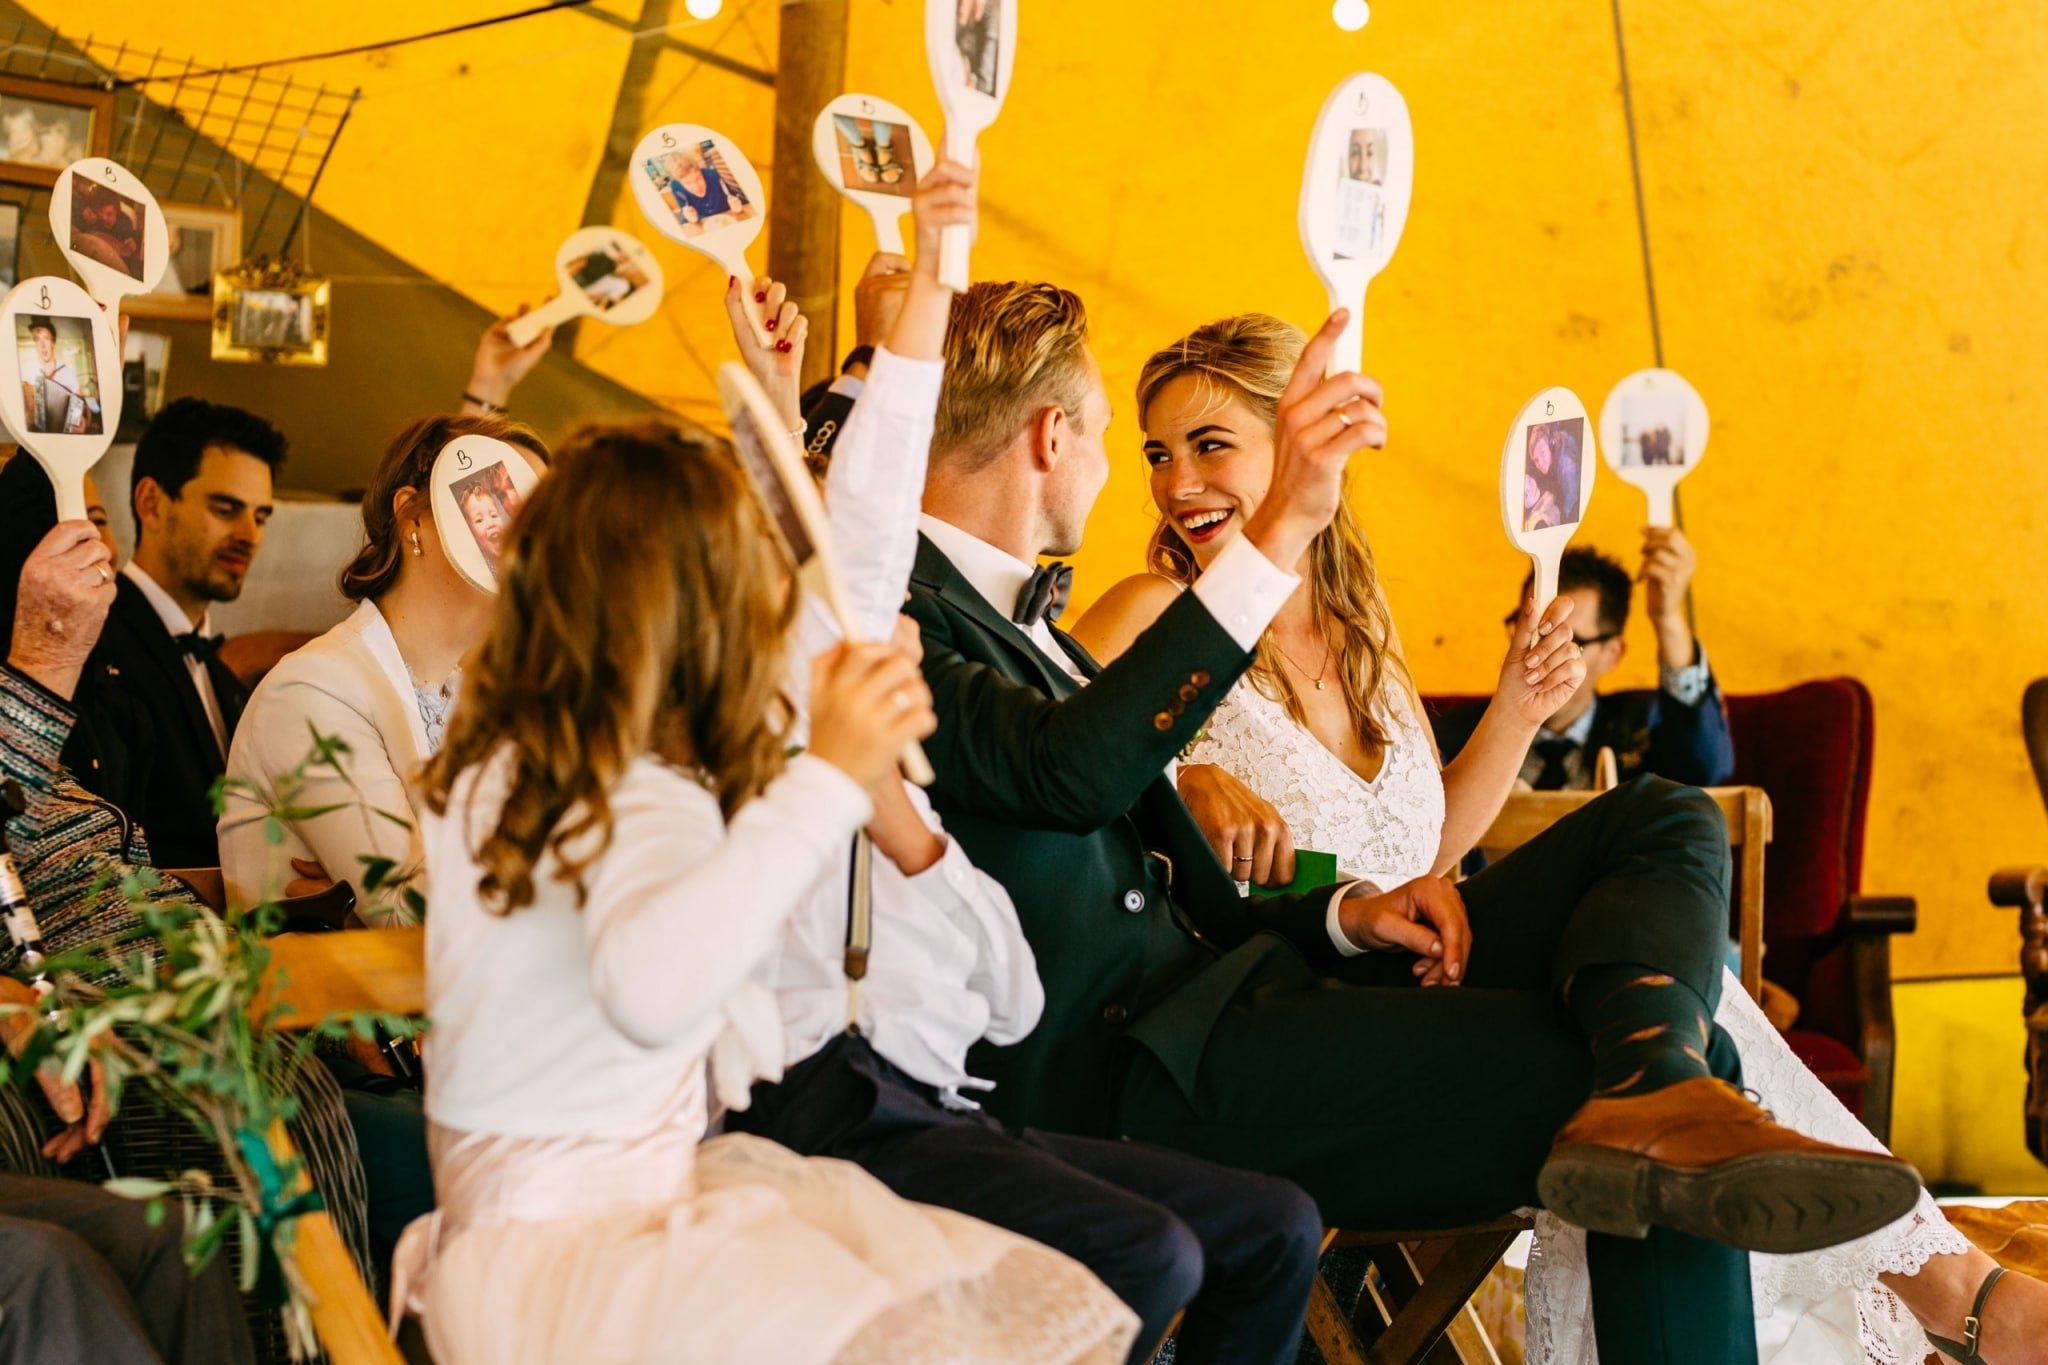 A wedding ceremony in a tent with people holding up photos.